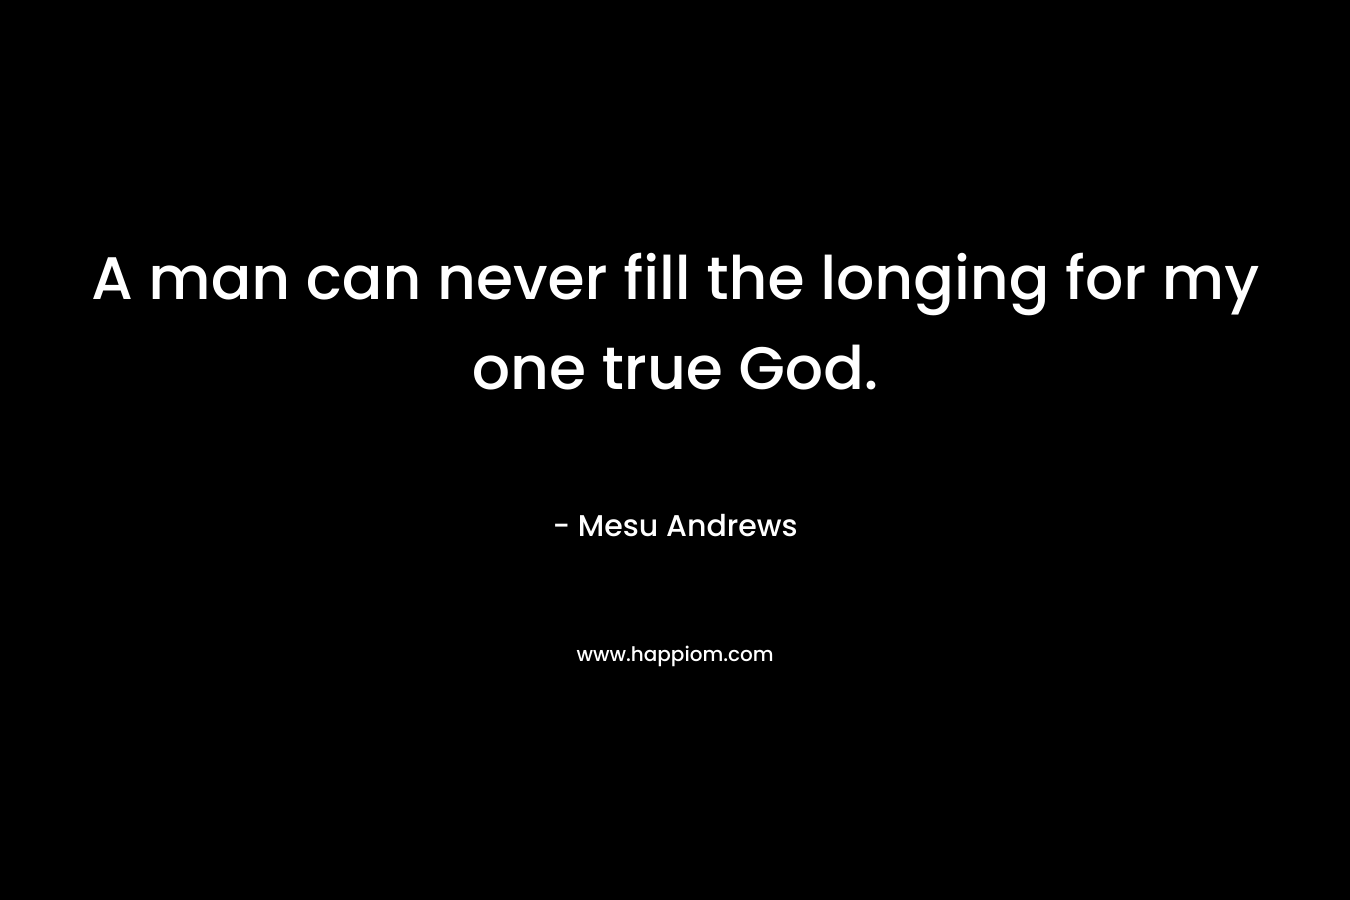 A man can never fill the longing for my one true God. – Mesu Andrews